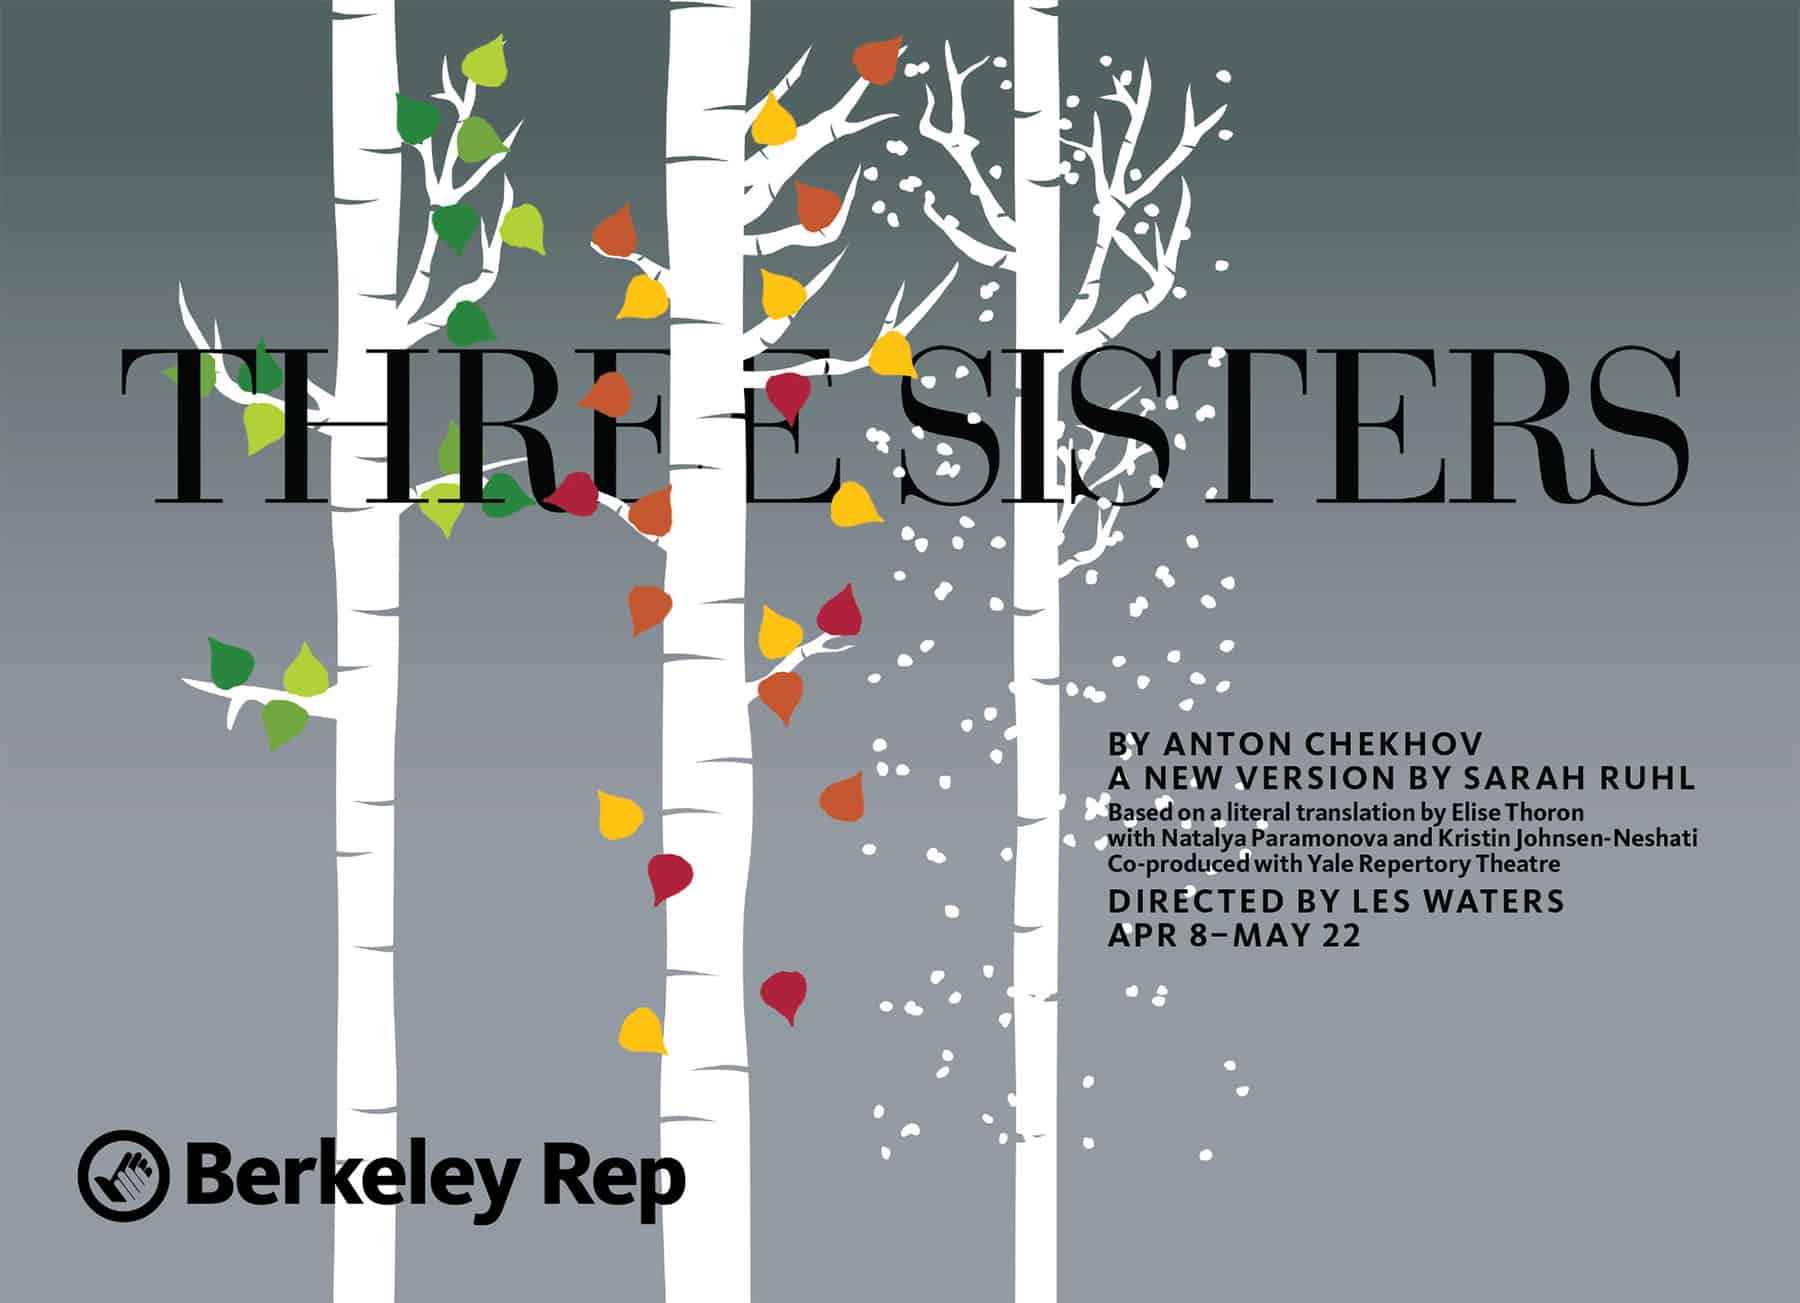 Poster for Sarah Ruhl's adaptation of Chekhov's "Three Sisters," directed by Les Waters at Berkeley Rep. The title is woven in front of and behind three stylized birch trees, each in a different season: summer, fall, and winter, evoking the personalities of the sisters.